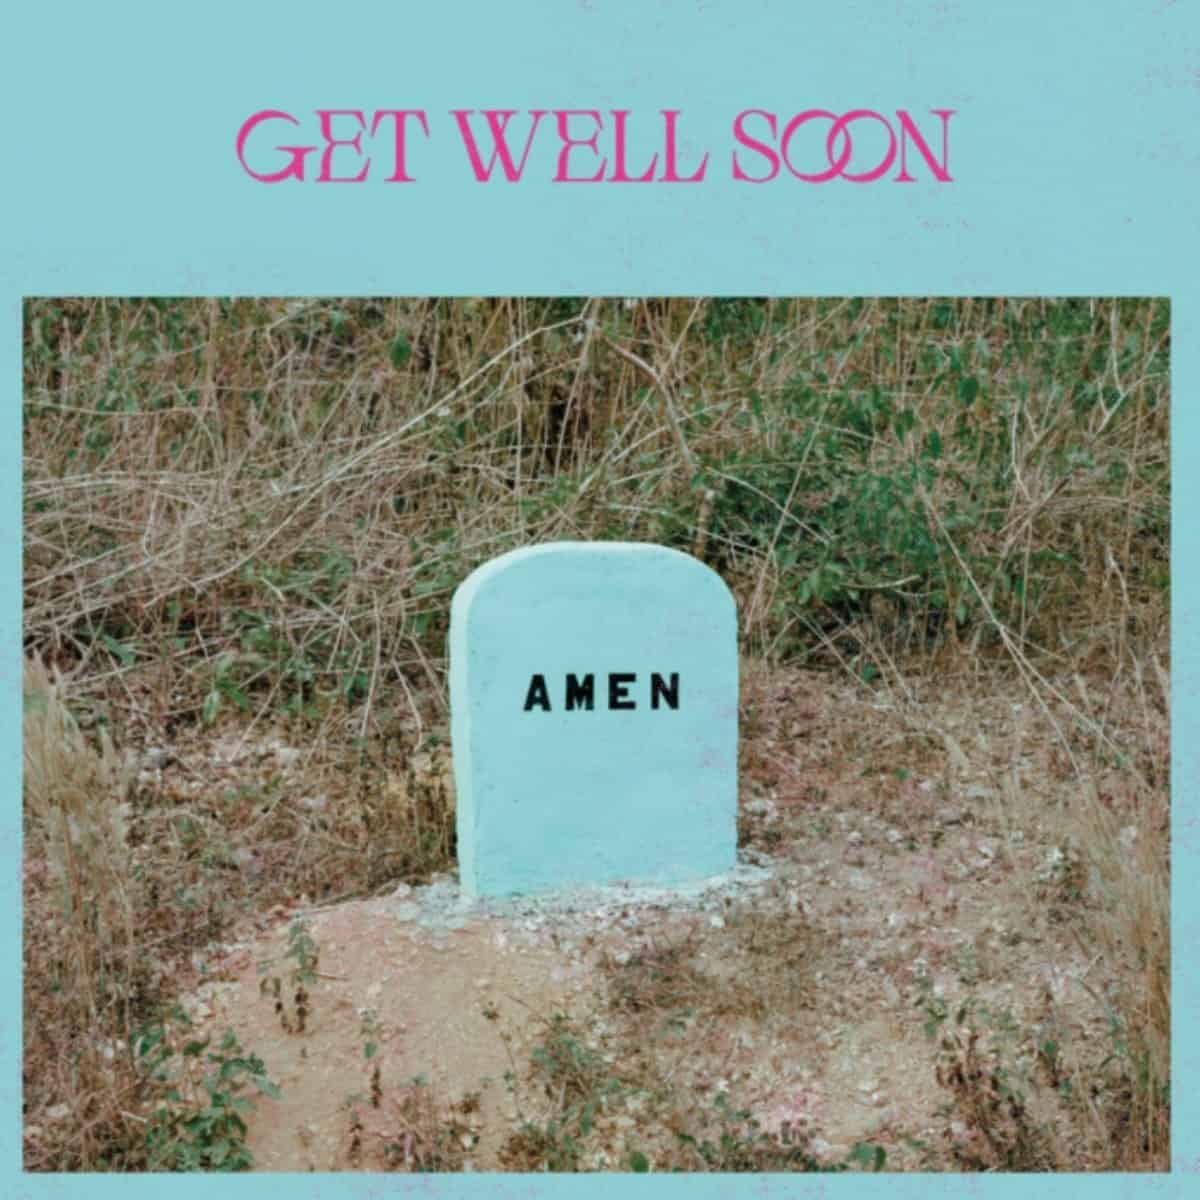 Get Well Soon — My Home is My Heart cover artwork